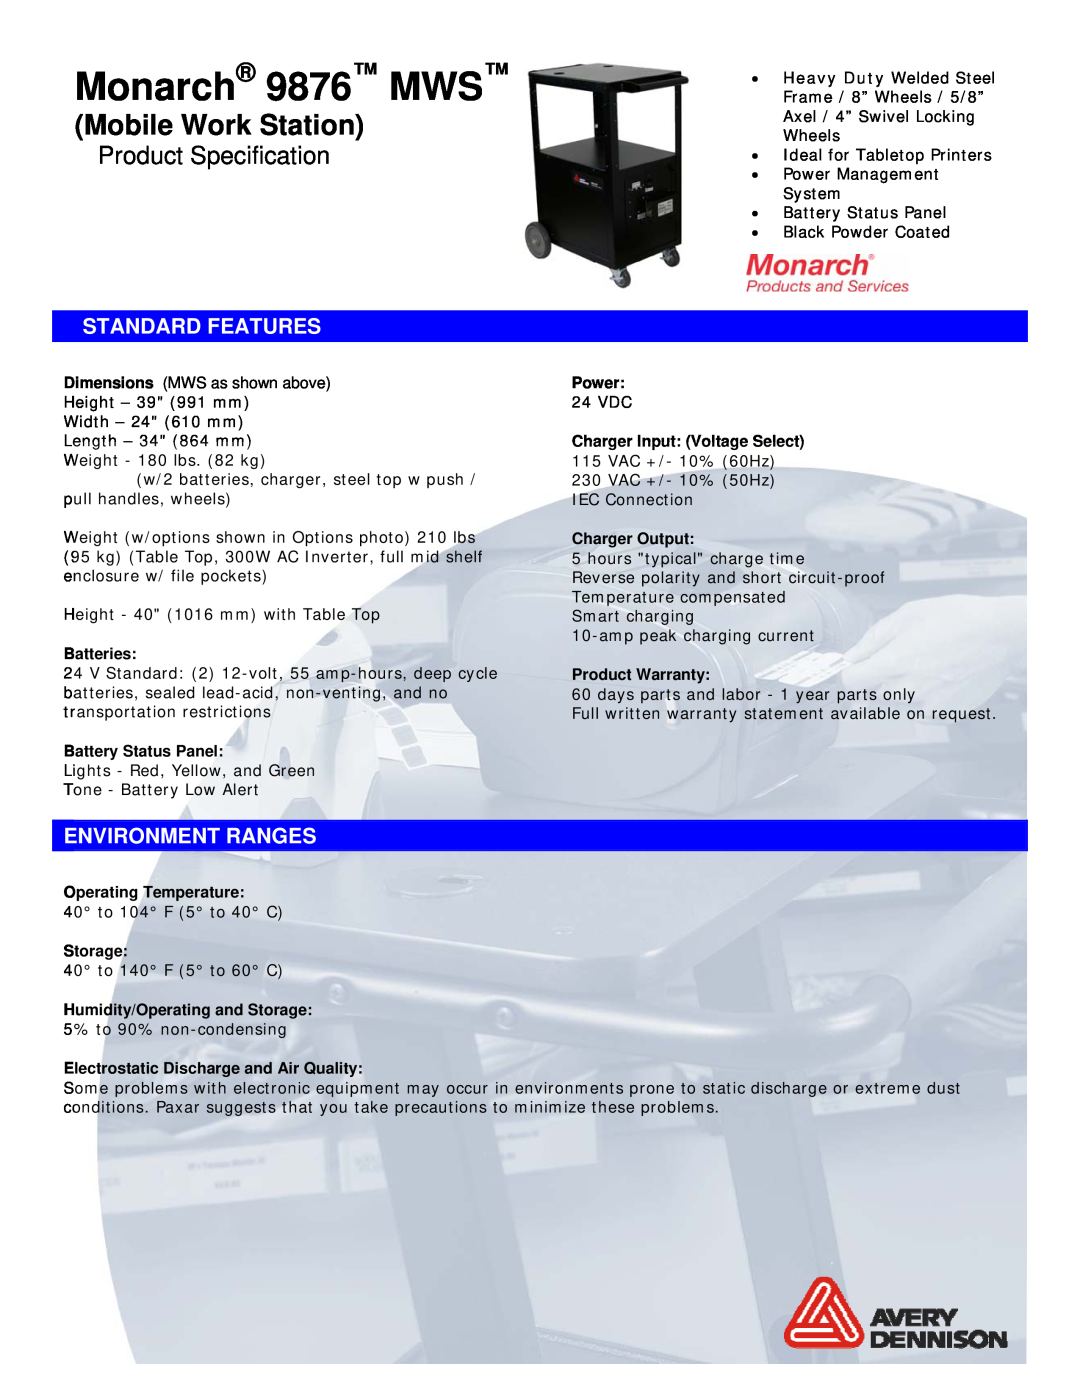 Monarch specifications Mobile Work Station, Standard Features, Environment Ranges, Monarch 9876 MWS 